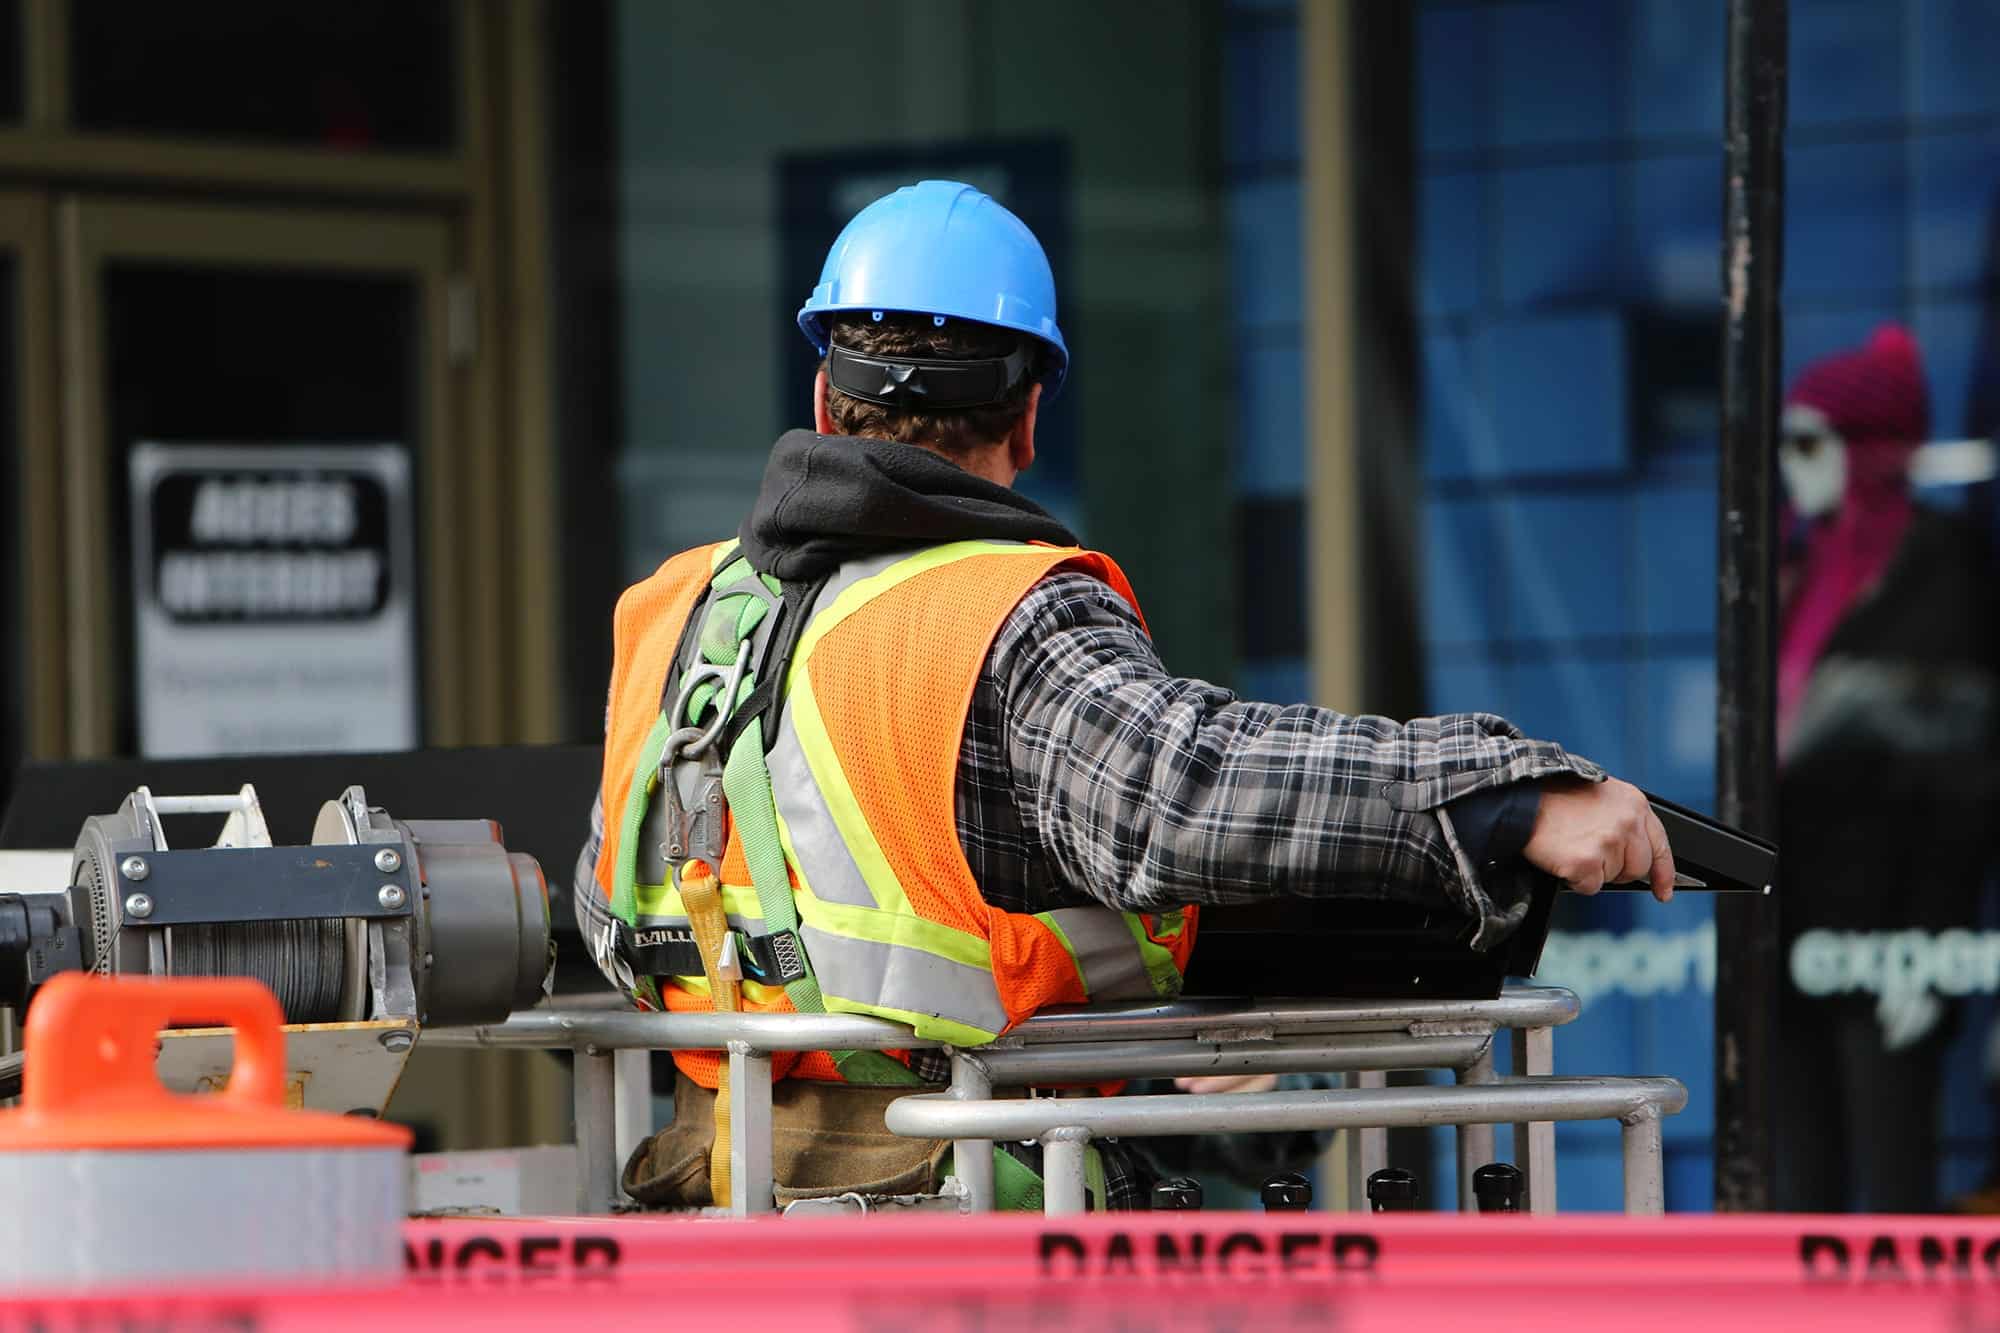 An occupational therapy construction worker wearing a hard hat and safety vest.